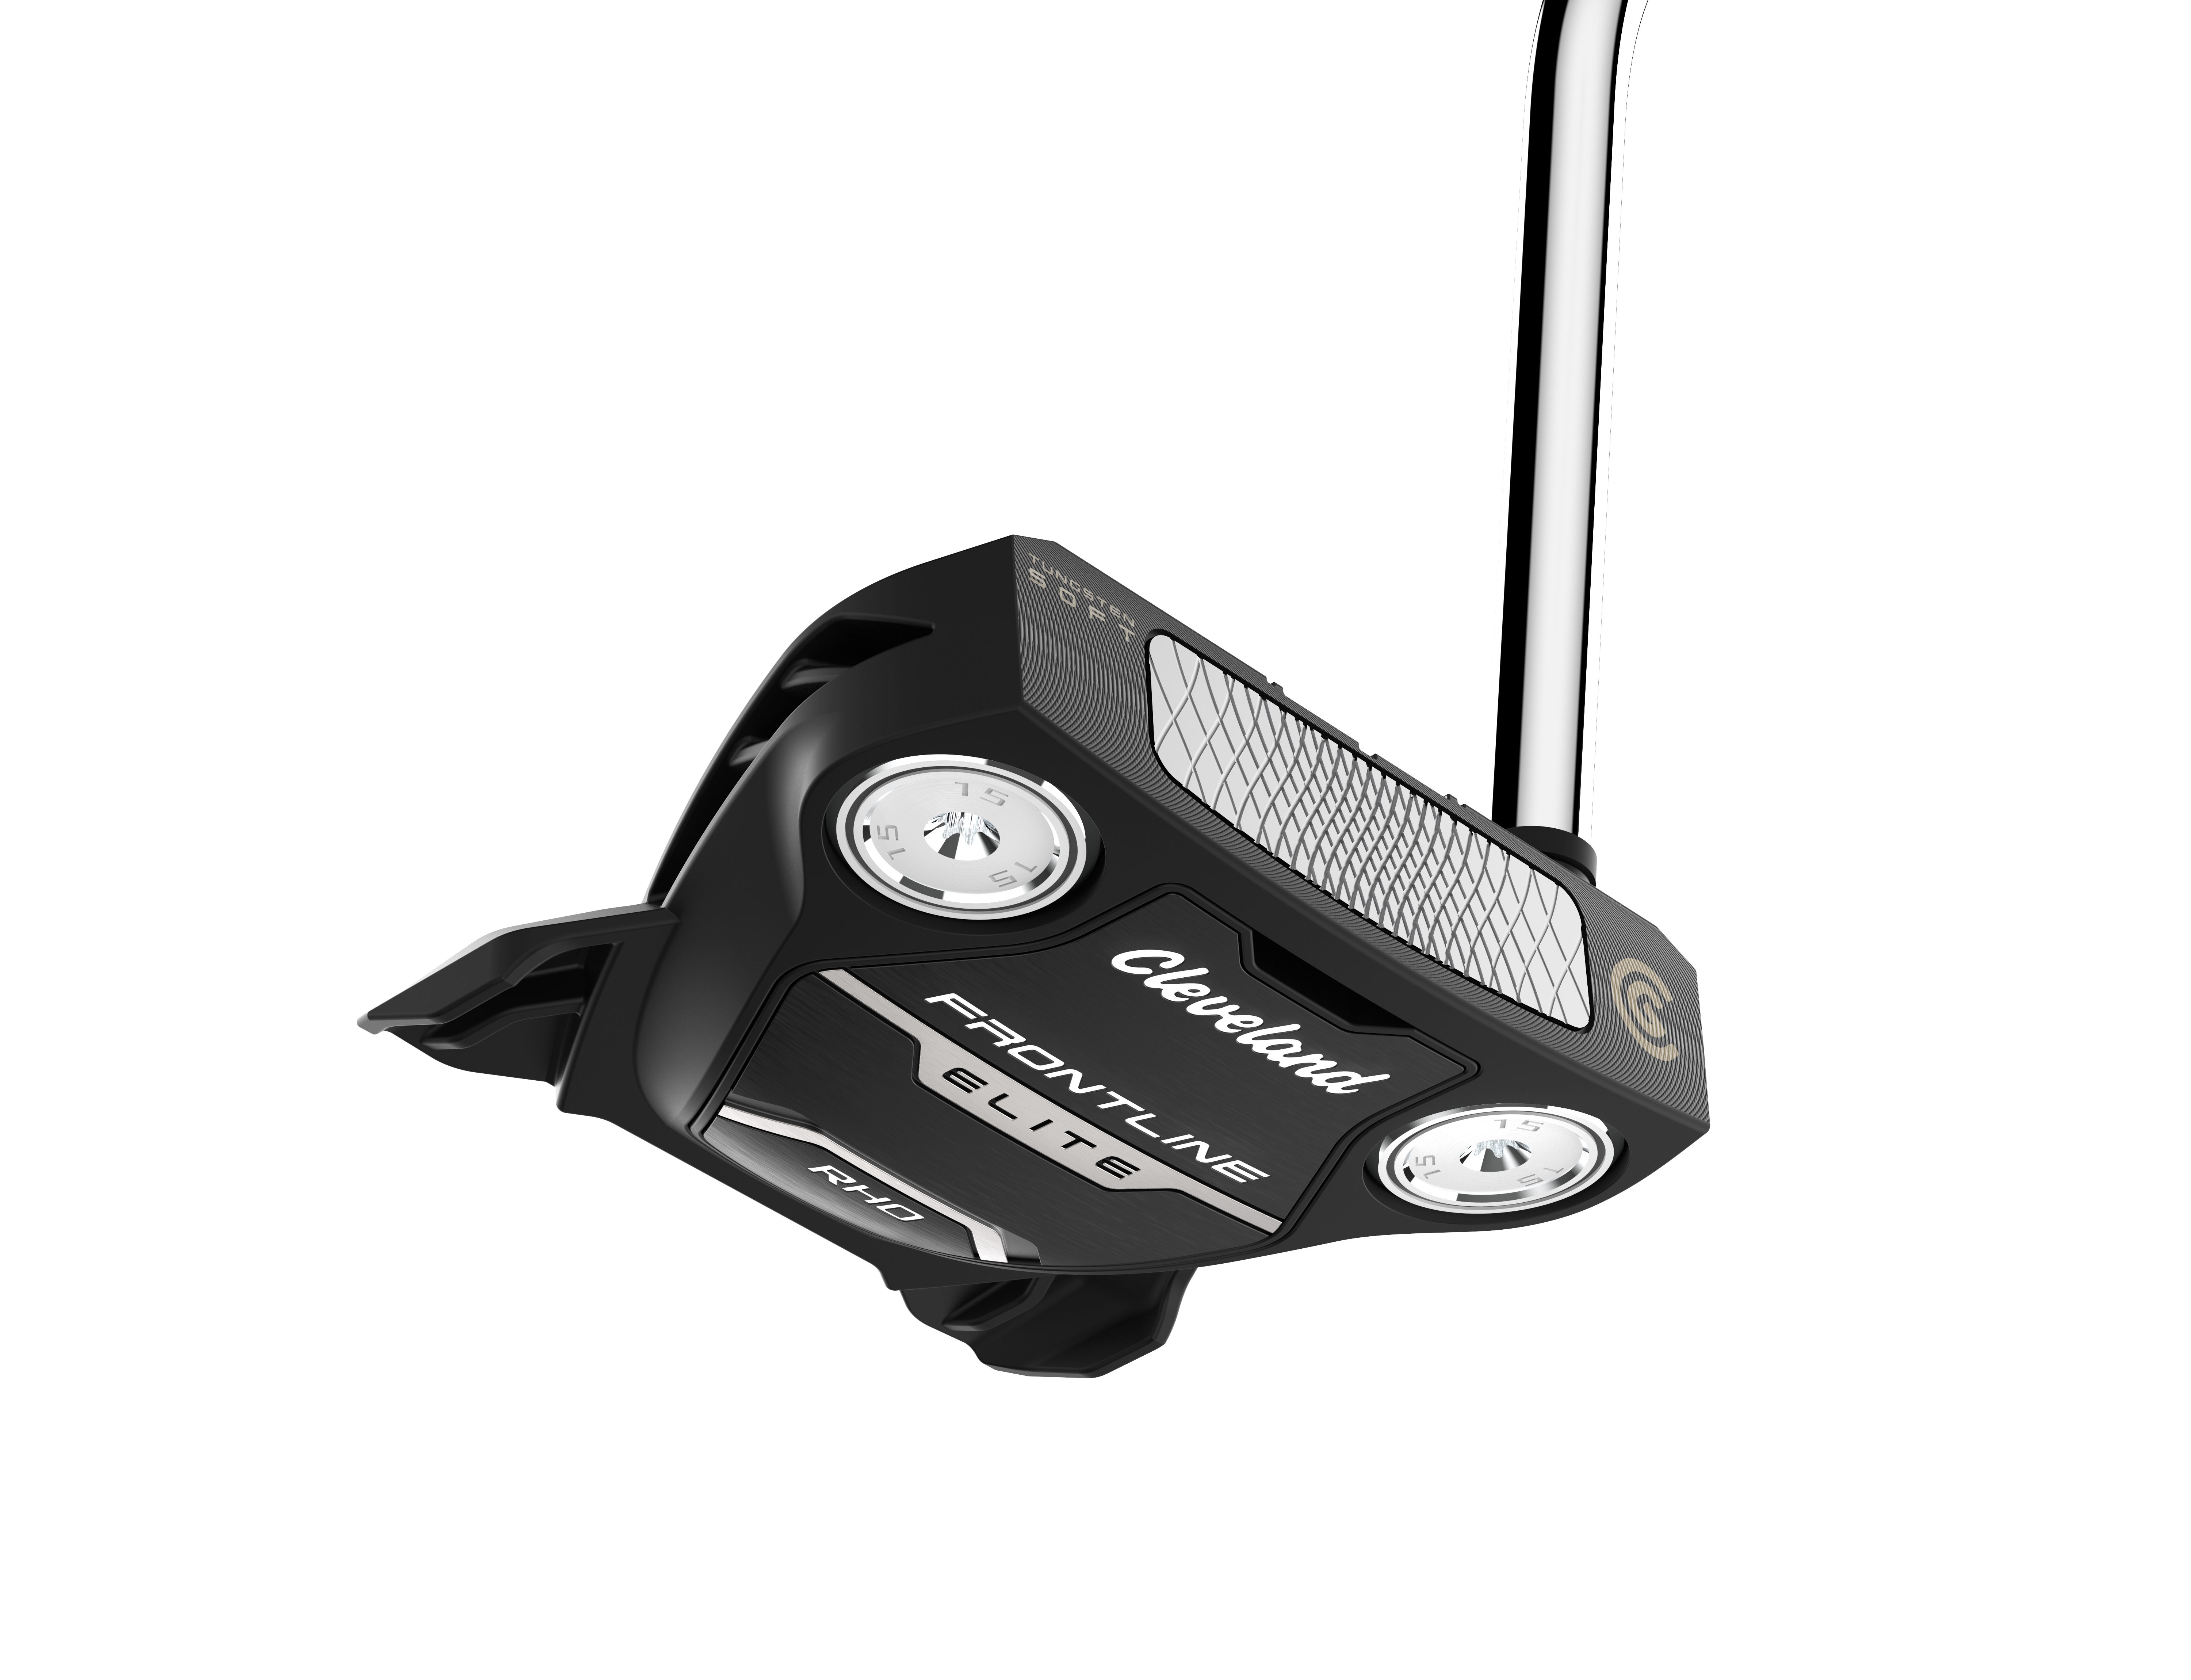 Cleveland Frontline Elite putters: What you need to know, Golf Equipment:  Clubs, Balls, Bags